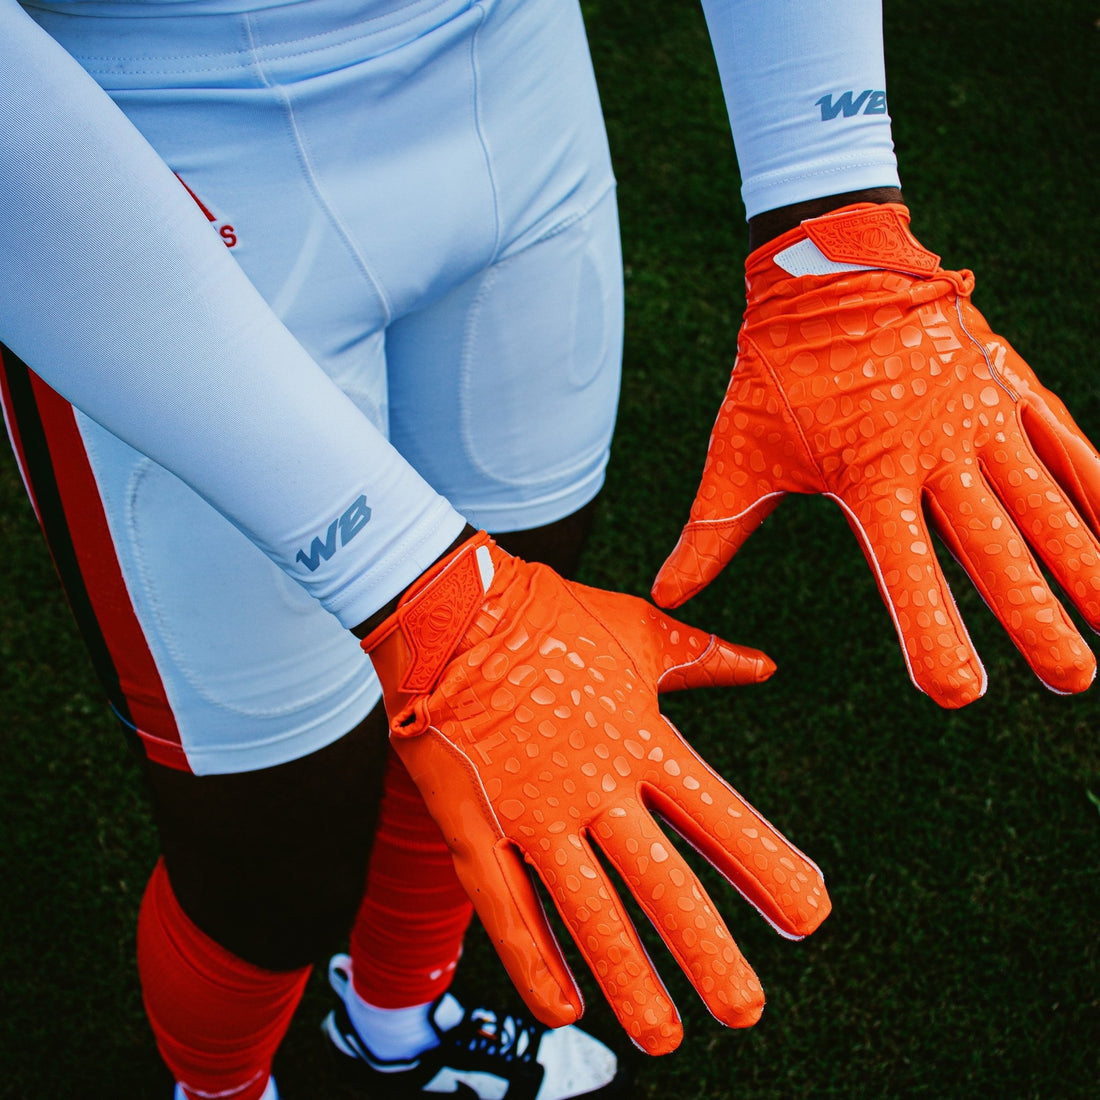 How Do Football Gloves Improve A Player's Performance? - We Ball Sports